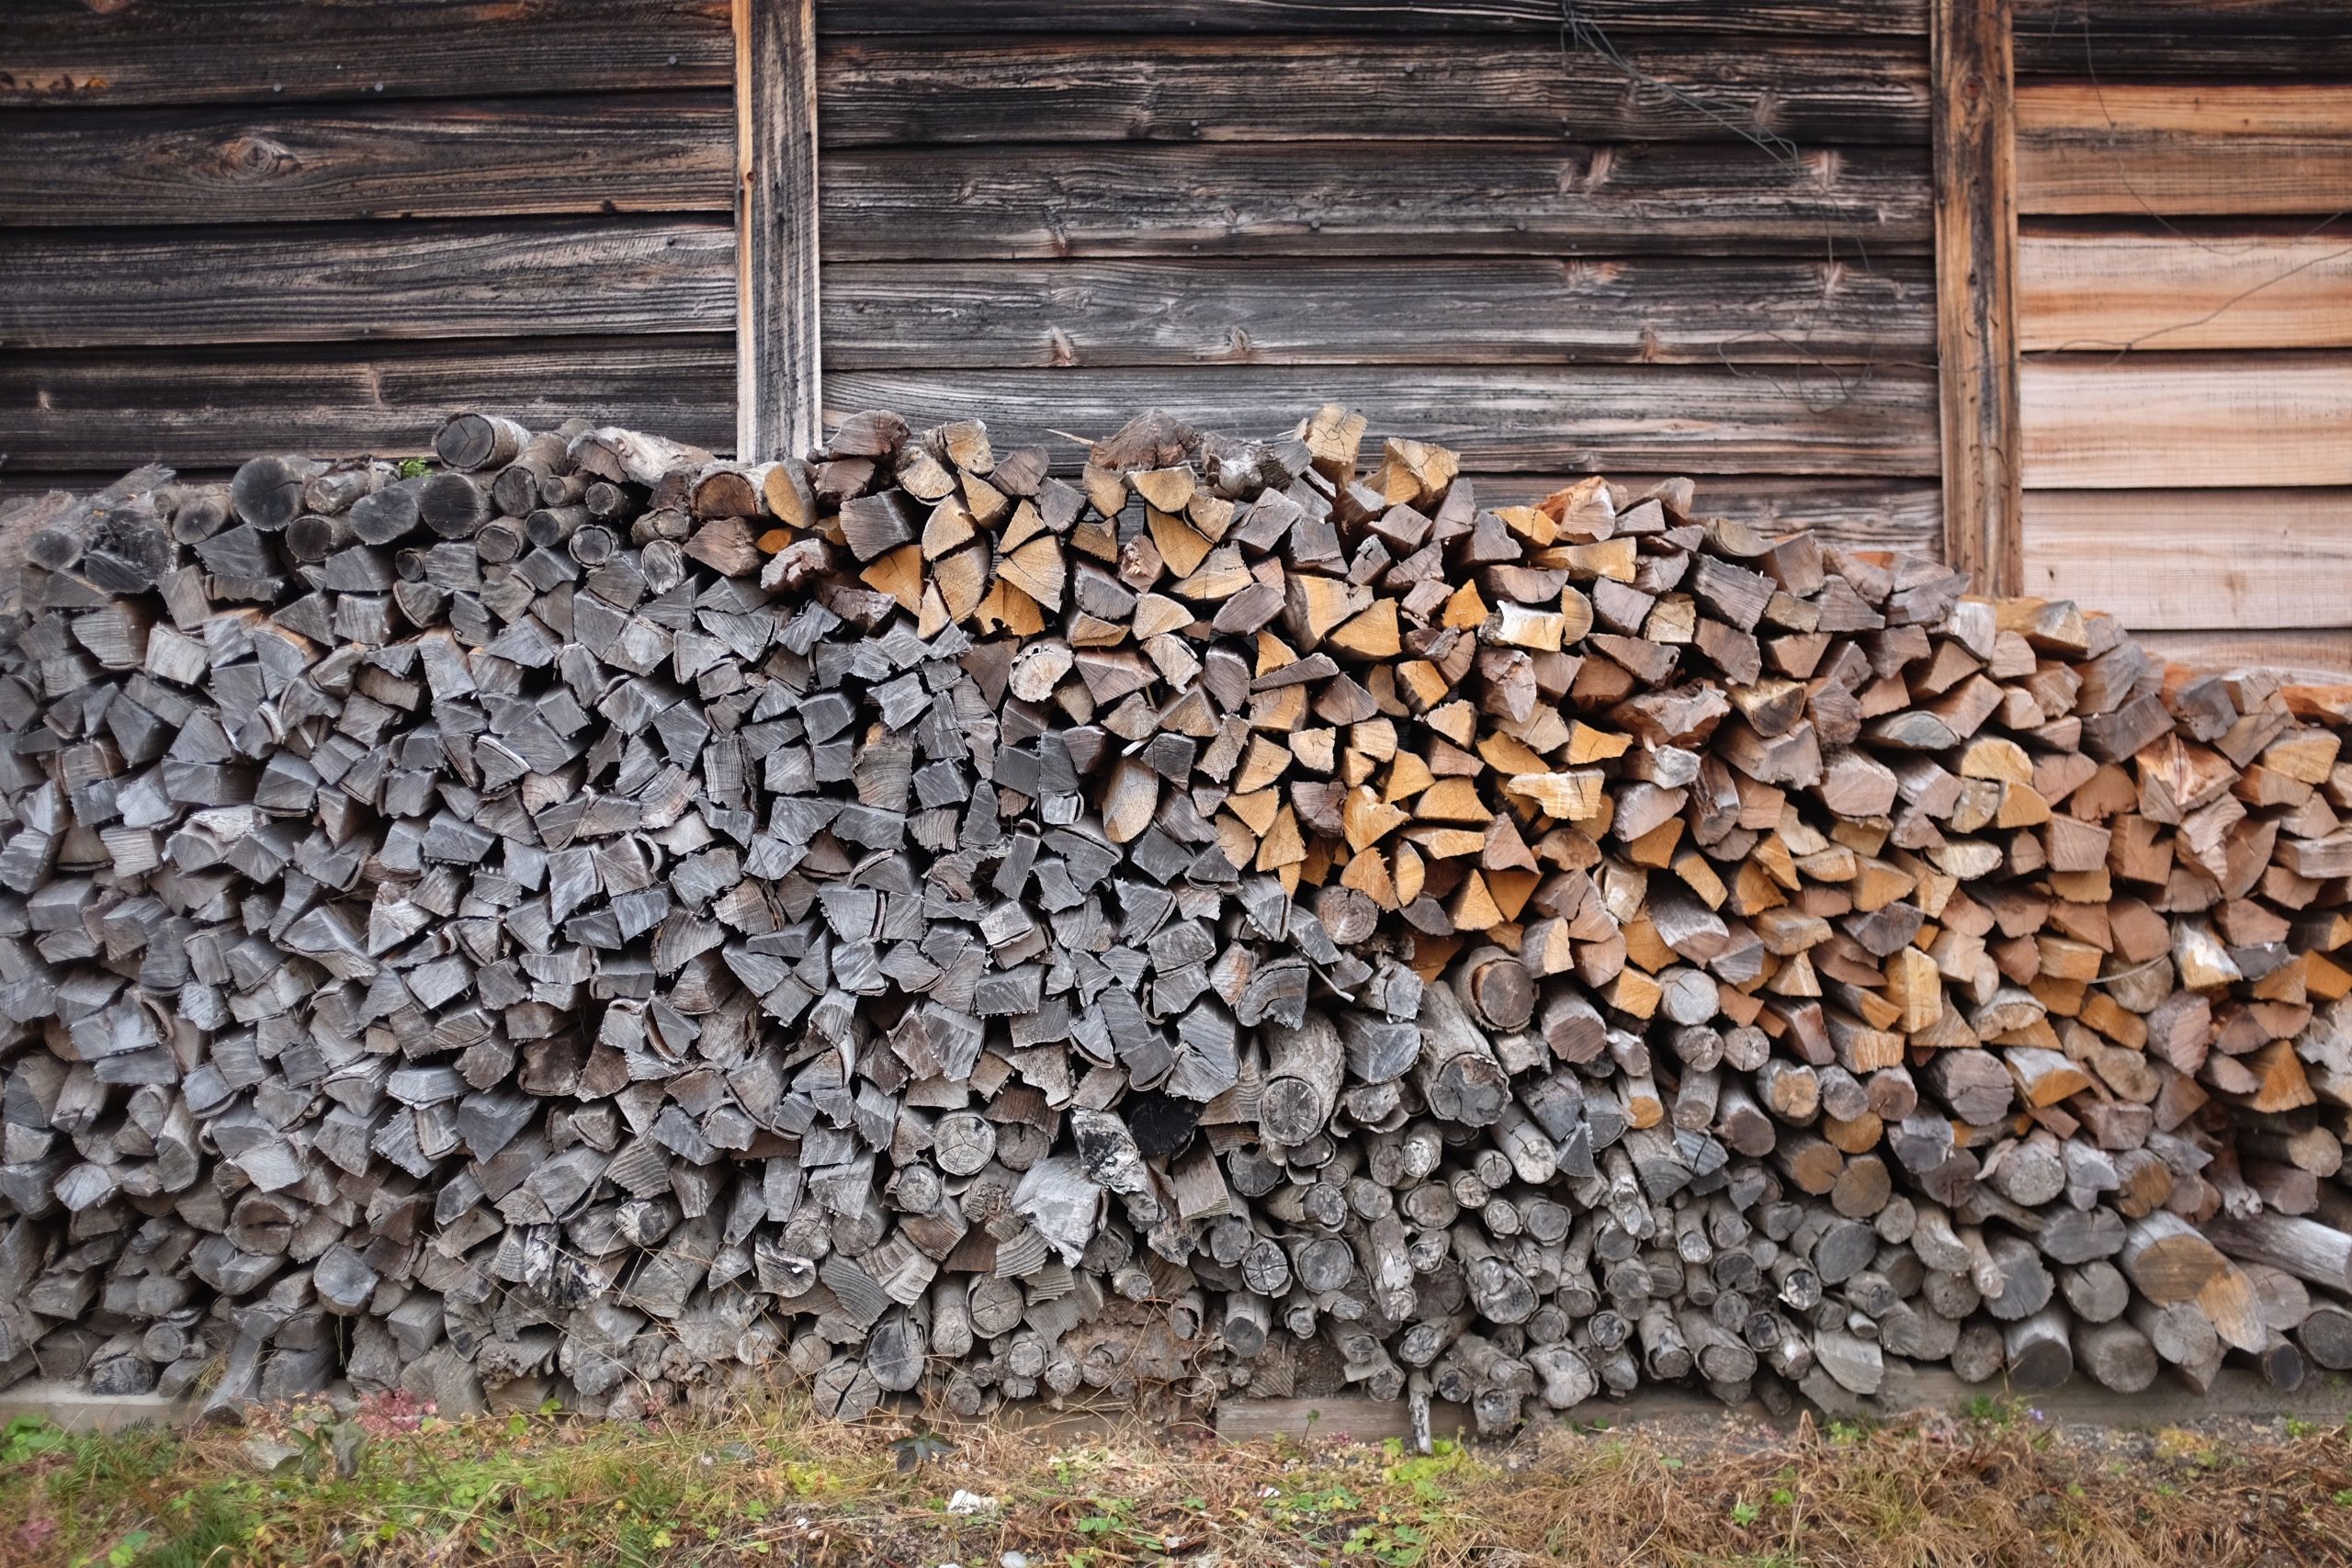 A heap of old and new firewood stacked against the wooden wall of a house.